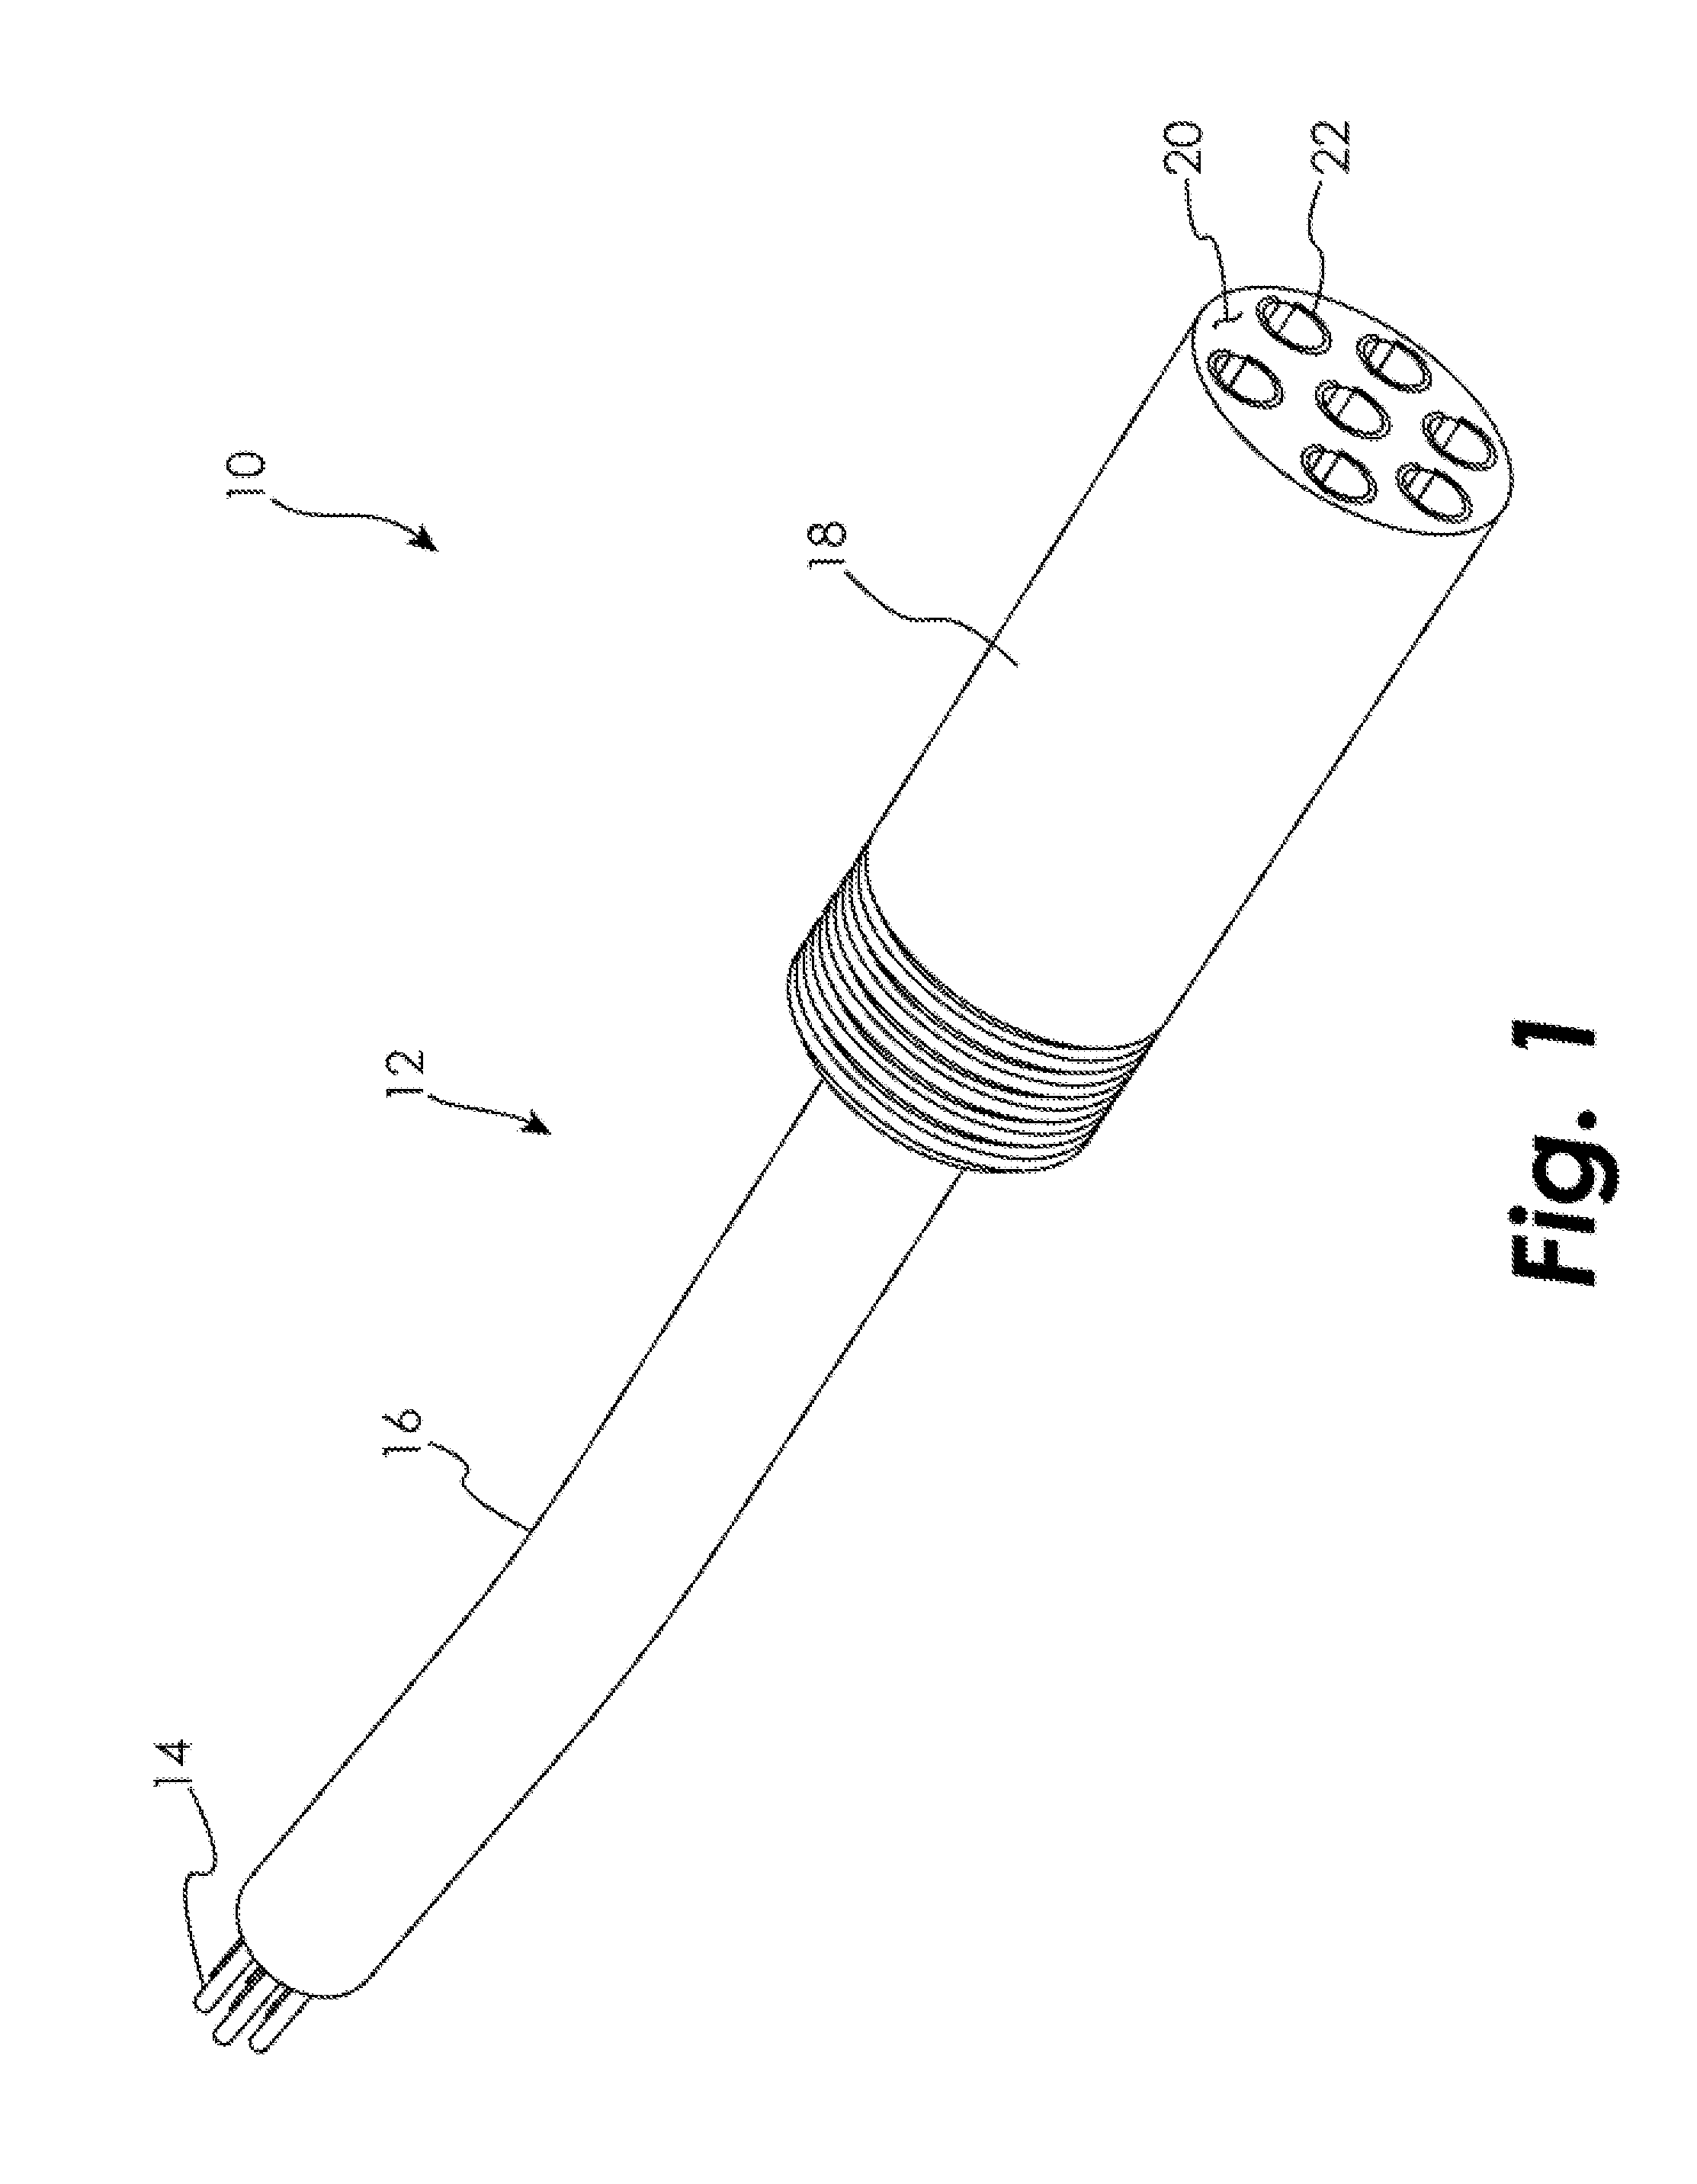 System and Method for Polyurethane Bonding During and After Overmolding